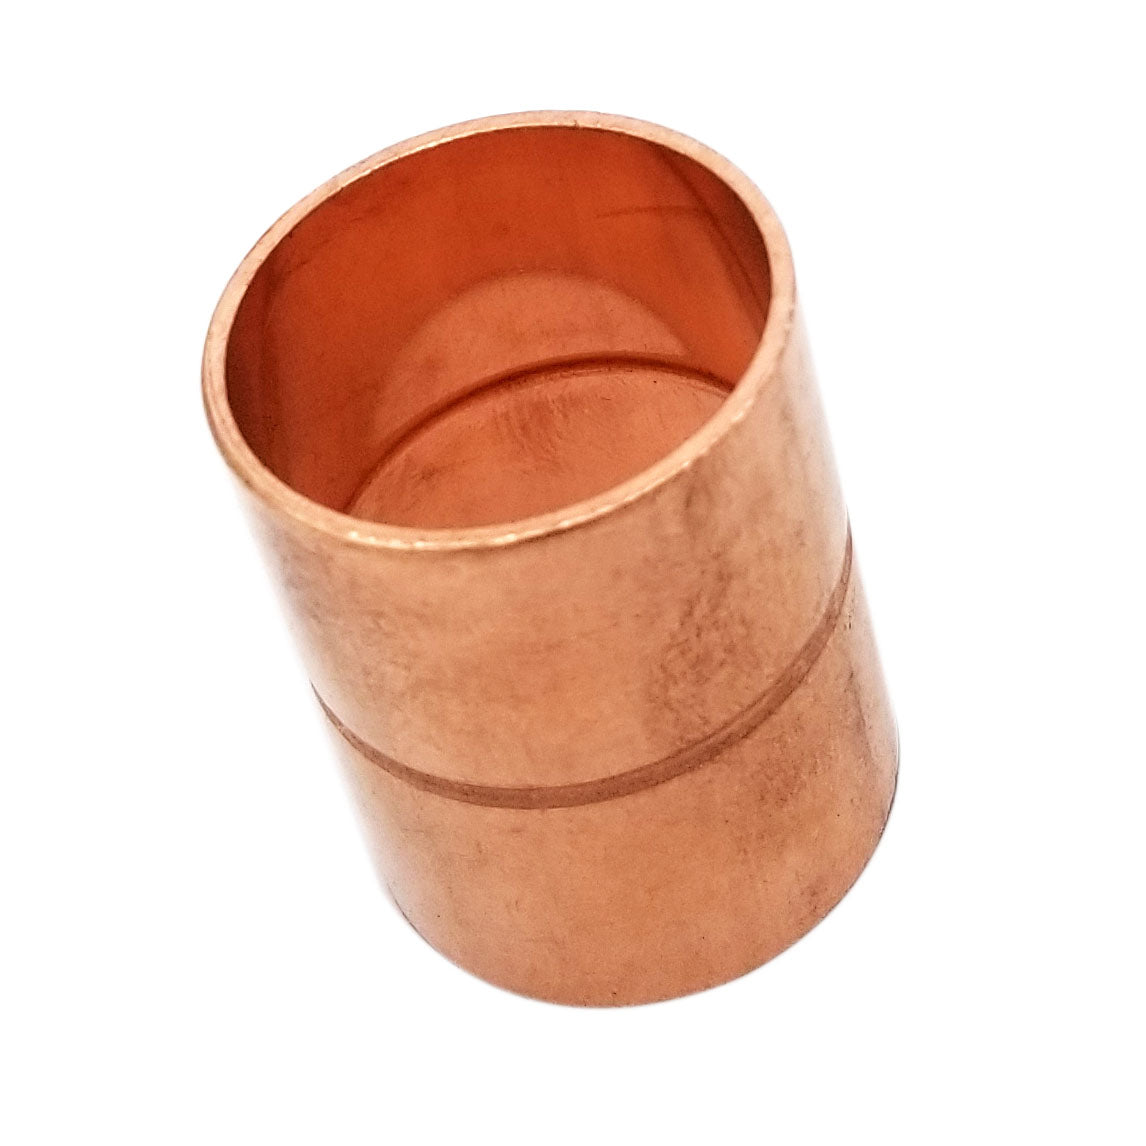 Copper Fitting 3/8 Inch (HVAC Outer Dimension) 1/4 Inch (Plumbing Inner Dimension) - Straight Copper Coupling Fittings With Rolled Tube Stop & HVAC – 99.9% Pure Copper - 5 Pack